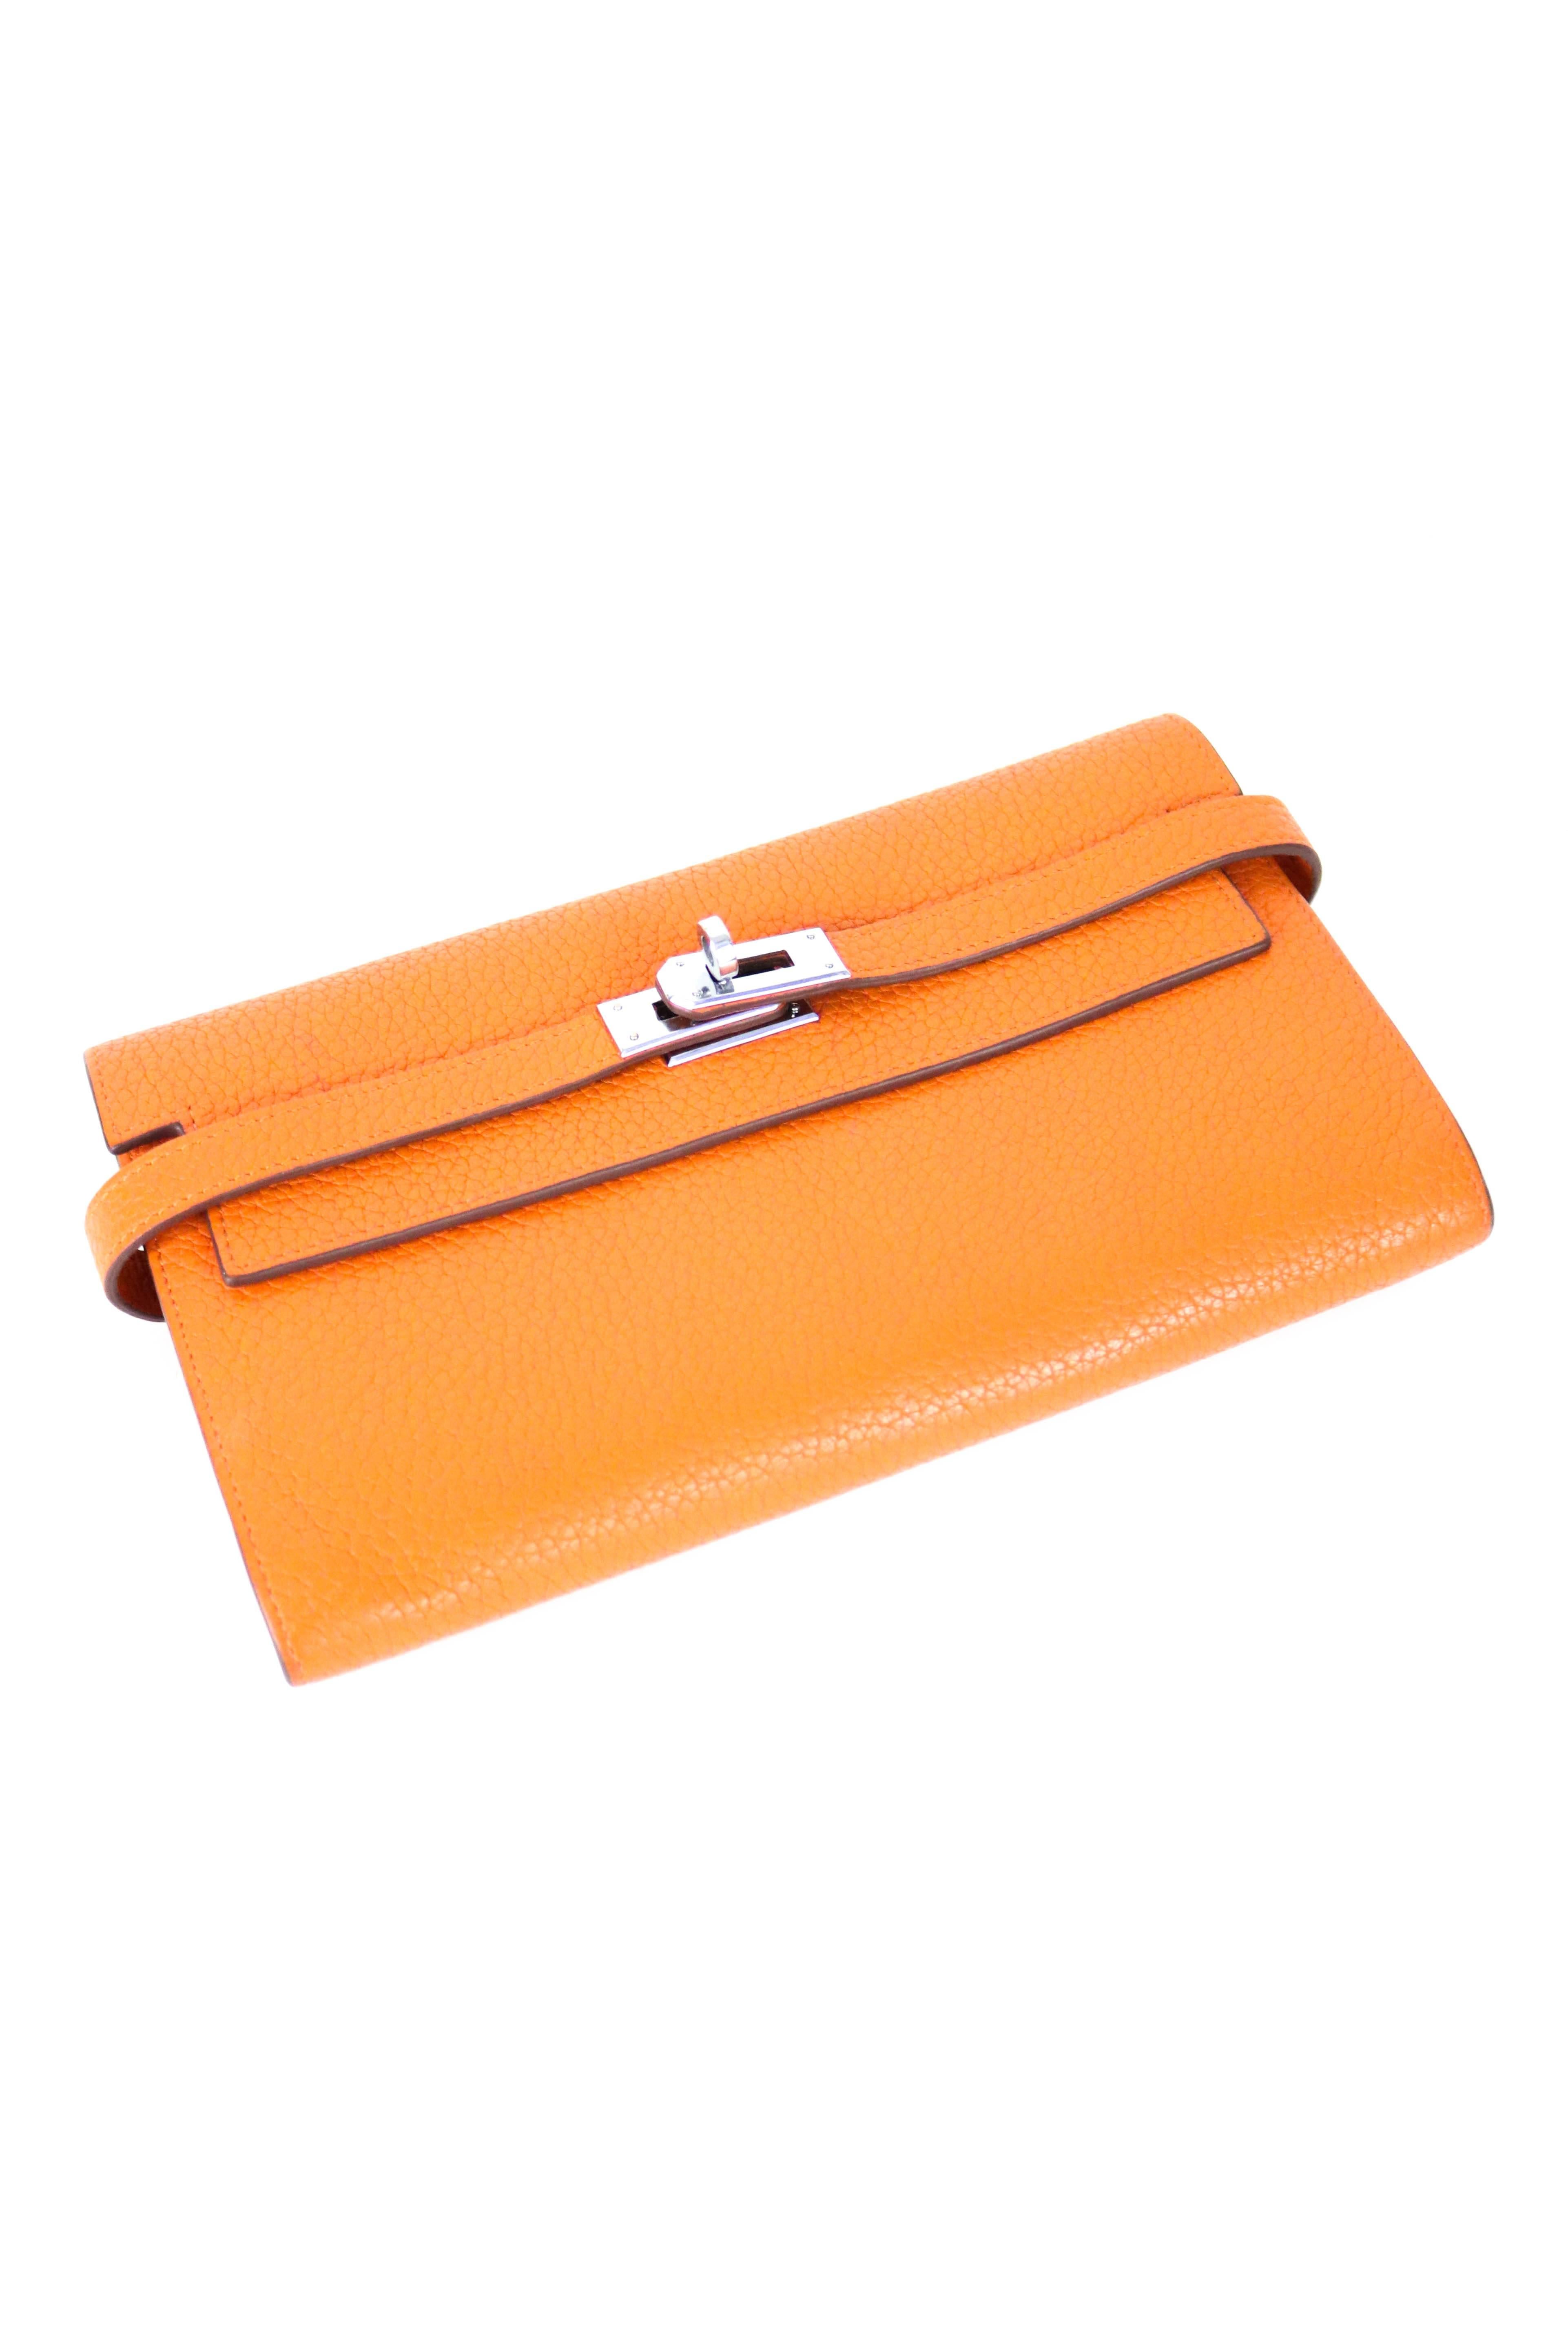 Offered is an Authentic Hermes Kelly Long Clutch Wallet in Orange Chèvre Leather.  This is an immediately recognizable Hermes color, known as equestrian  orange.  Palladium hardware coordinates beautifully with the rich hue.  Signature  turn-lock